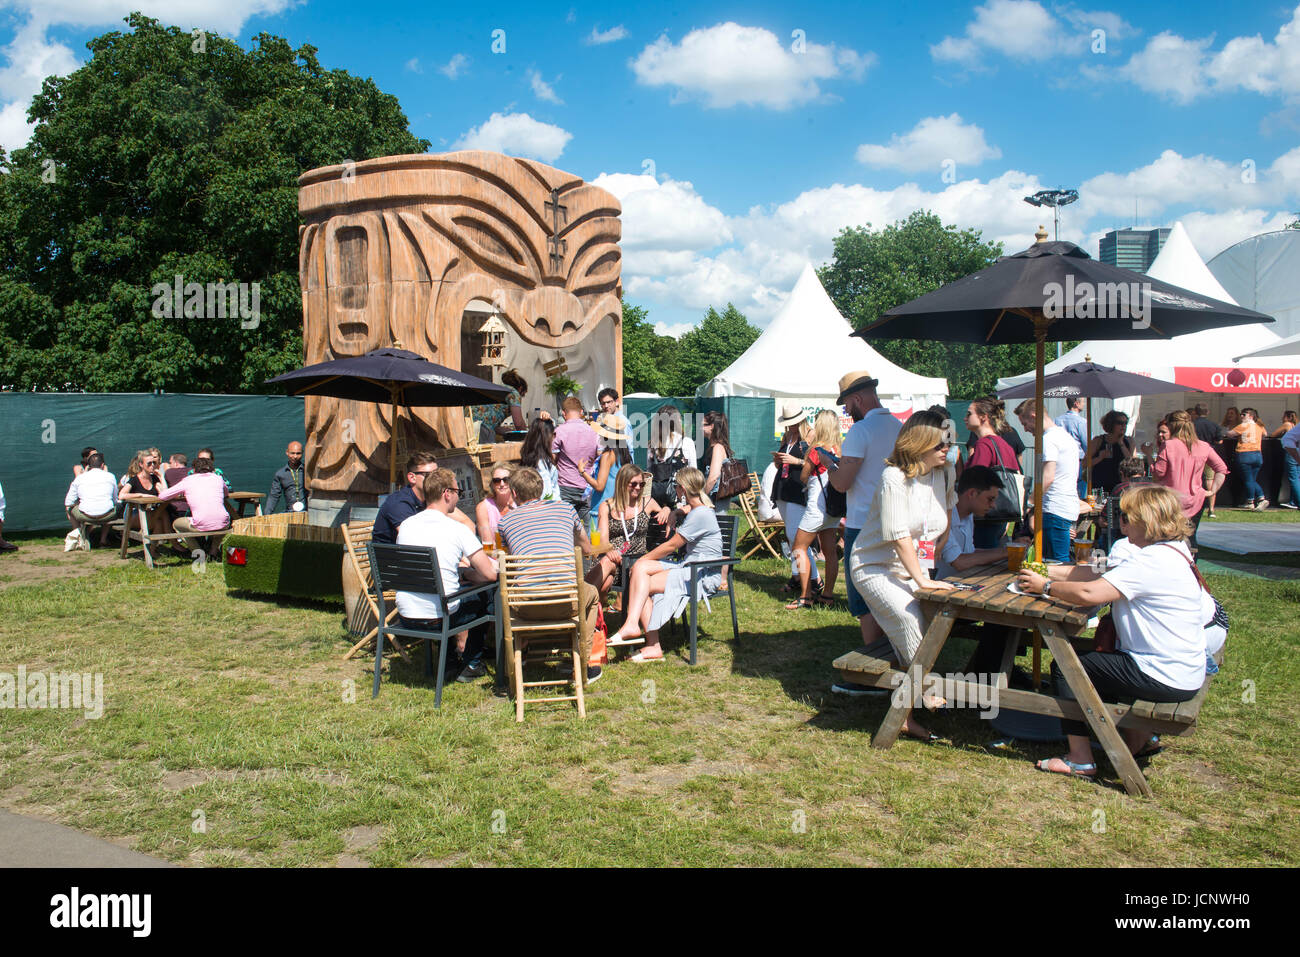 Regent Park, London, UK. 15th June 2017. Visitors at the Taste of London festival in Regent's Park, where London's top chefs show off their skills and serve up delicious food in the sunshine. Credit: Michael Tubi/Alamy Live News Stock Photo